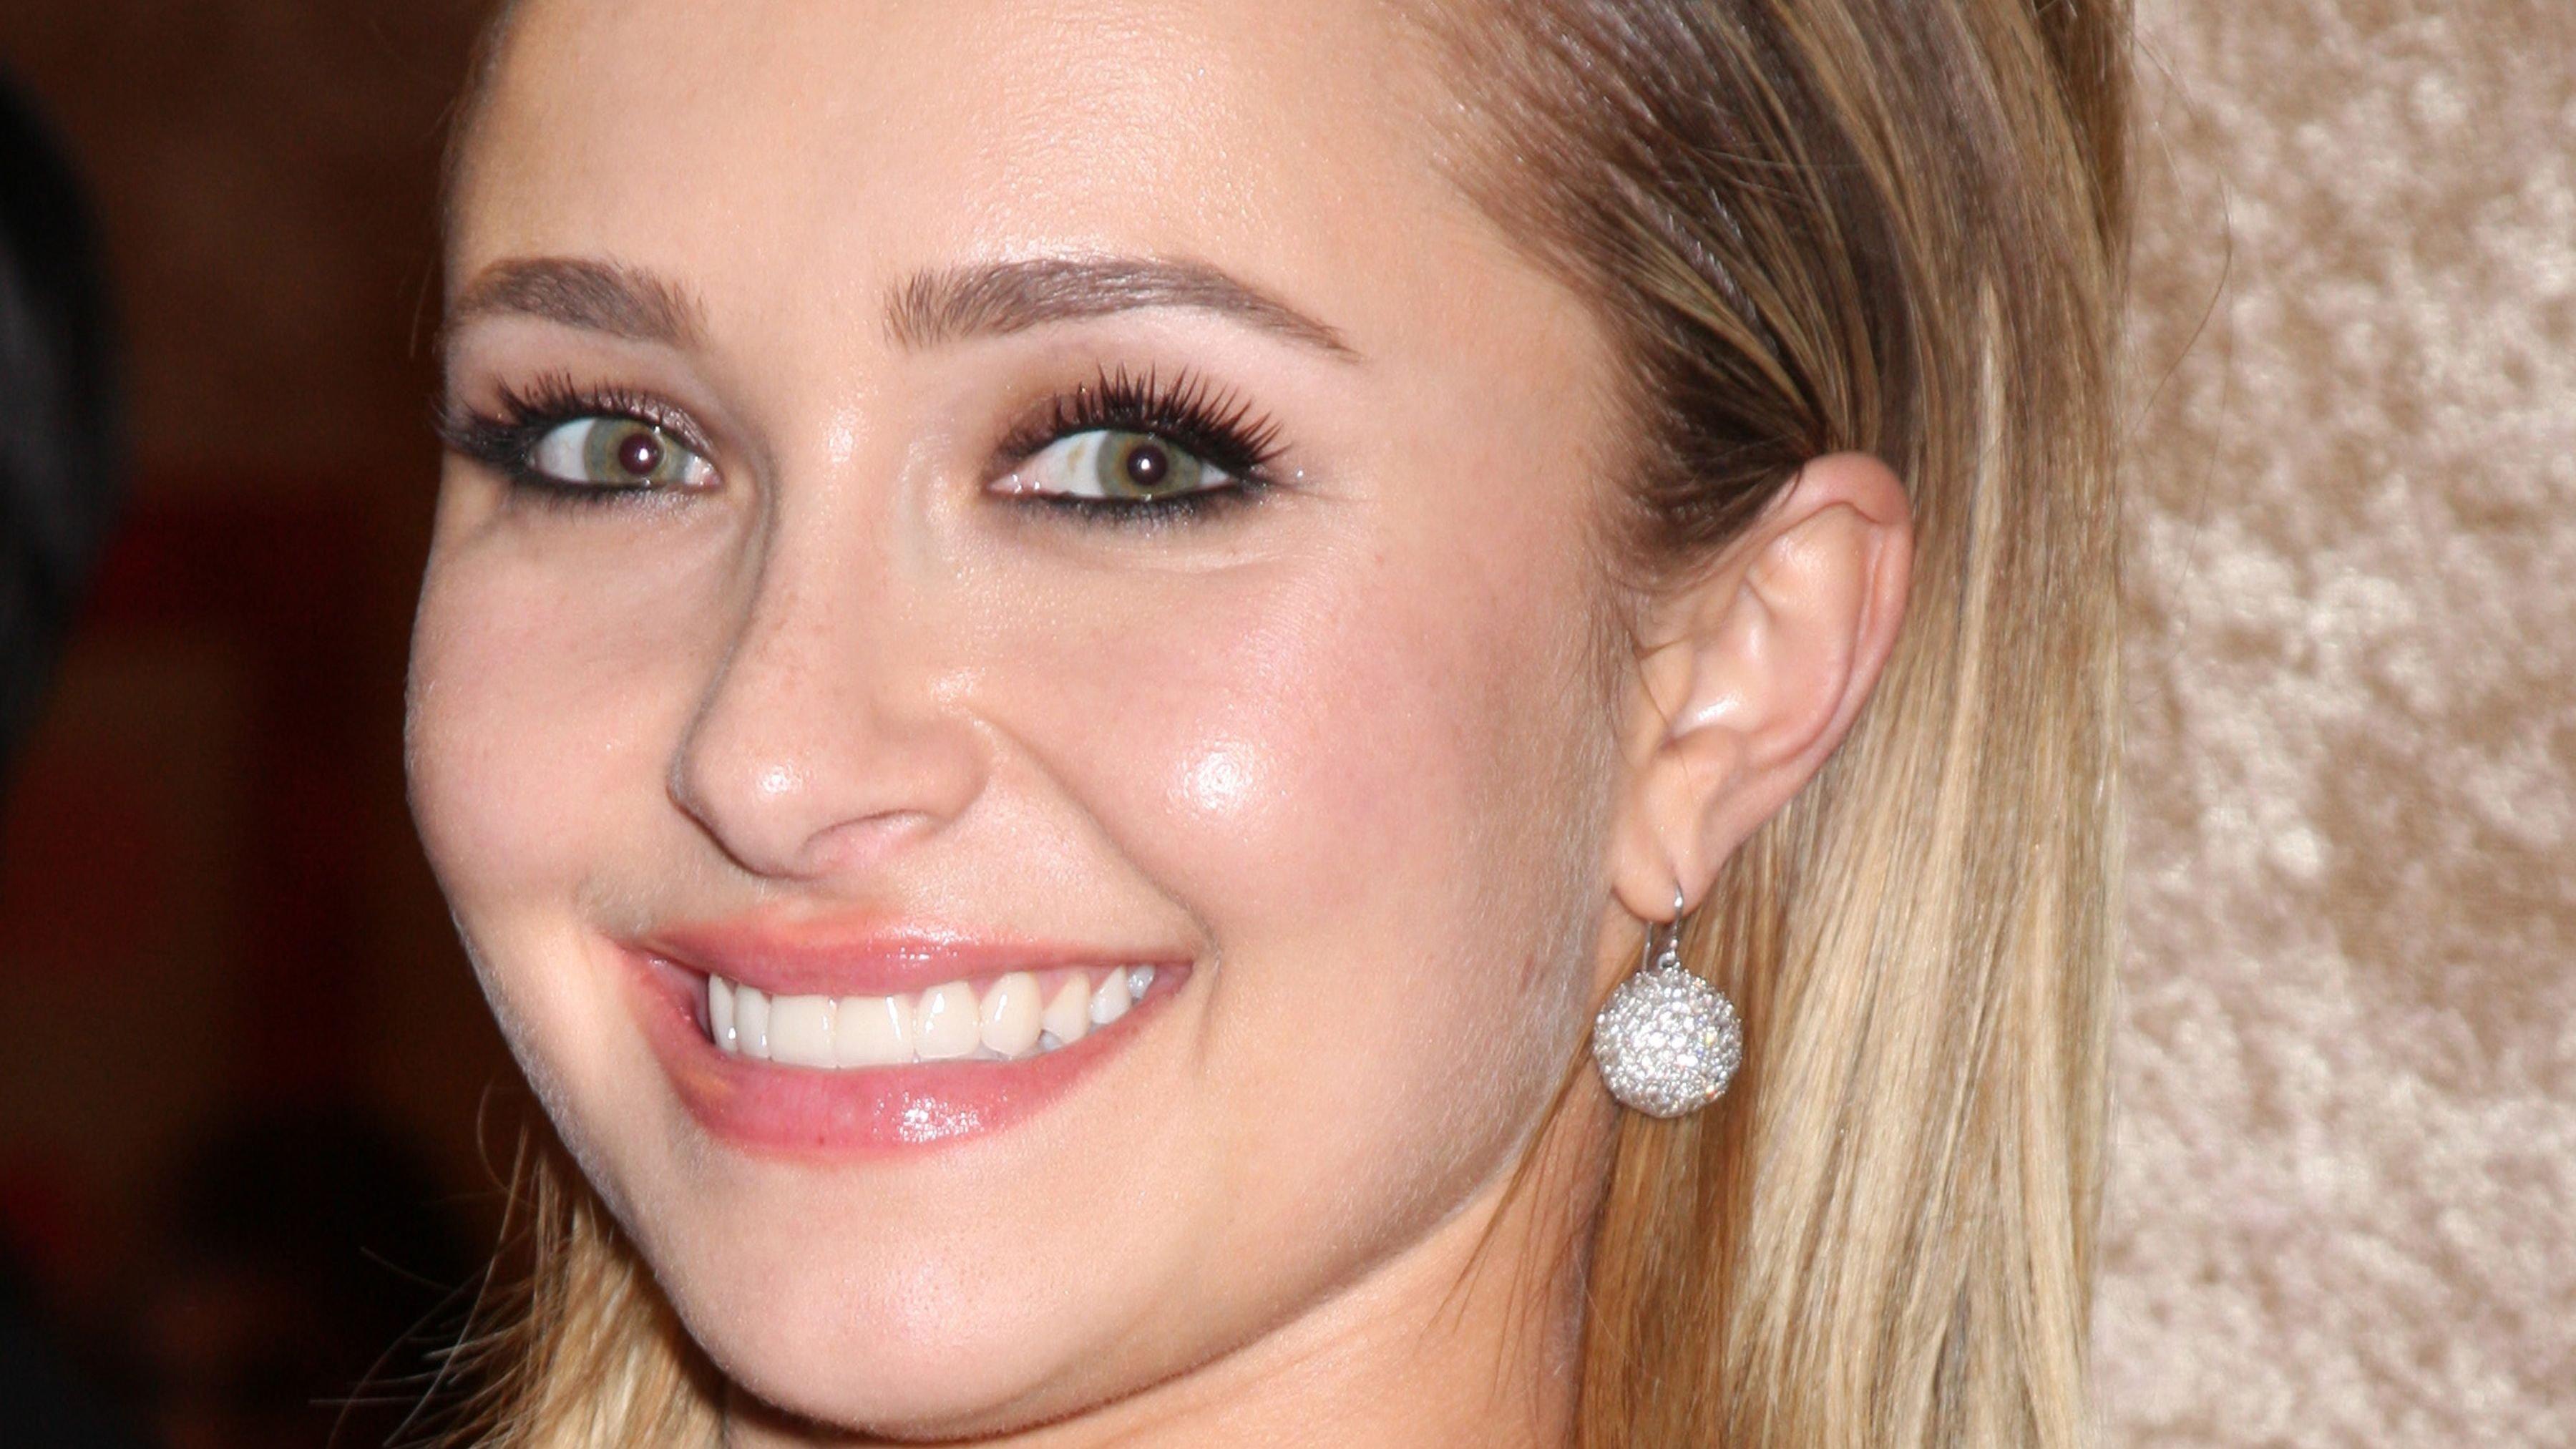 Hollywood actress Hayden Panettiere